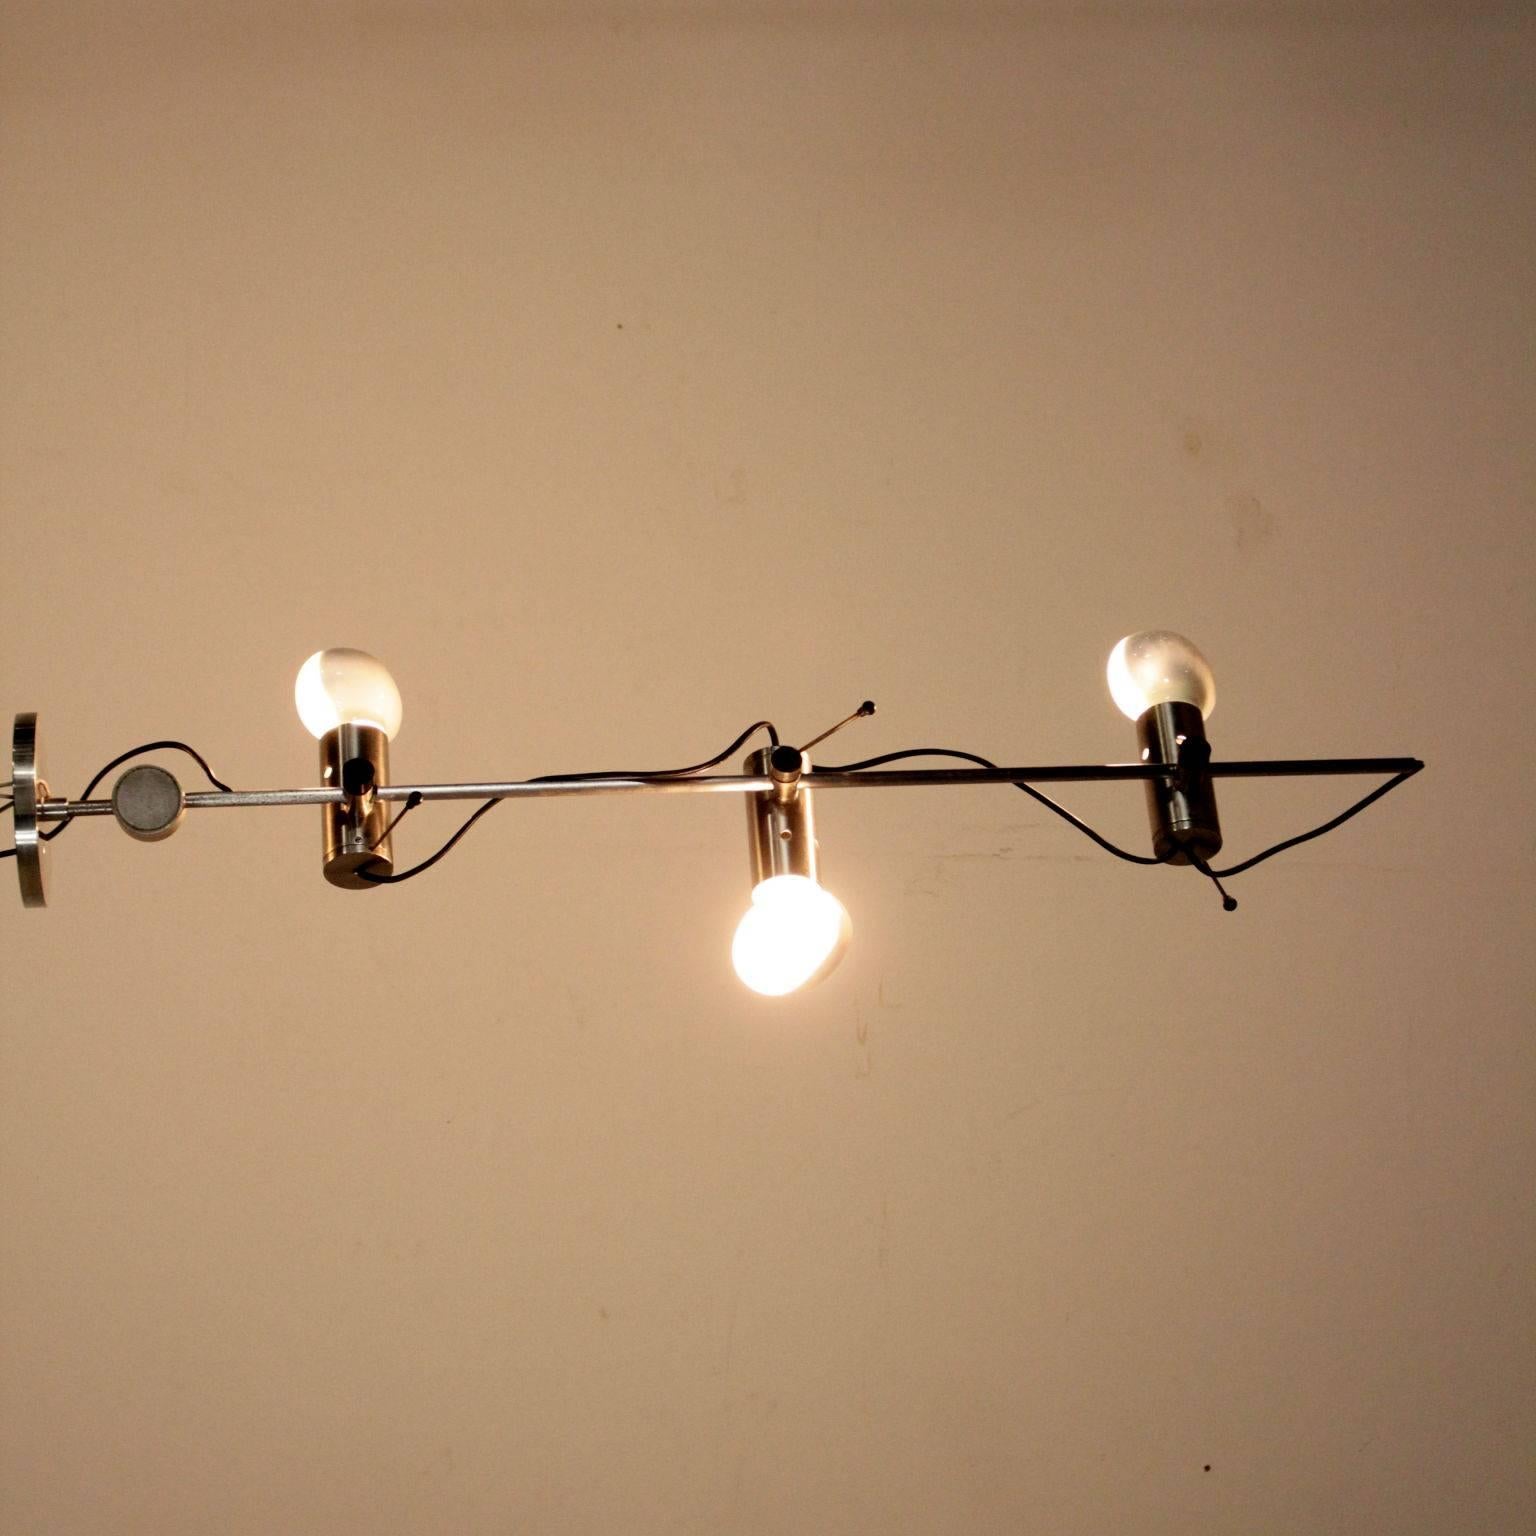 Mid-Century Modern Wall Lamp by Tito Agnoli Chromed Metal Vintage Manufactured in Italy